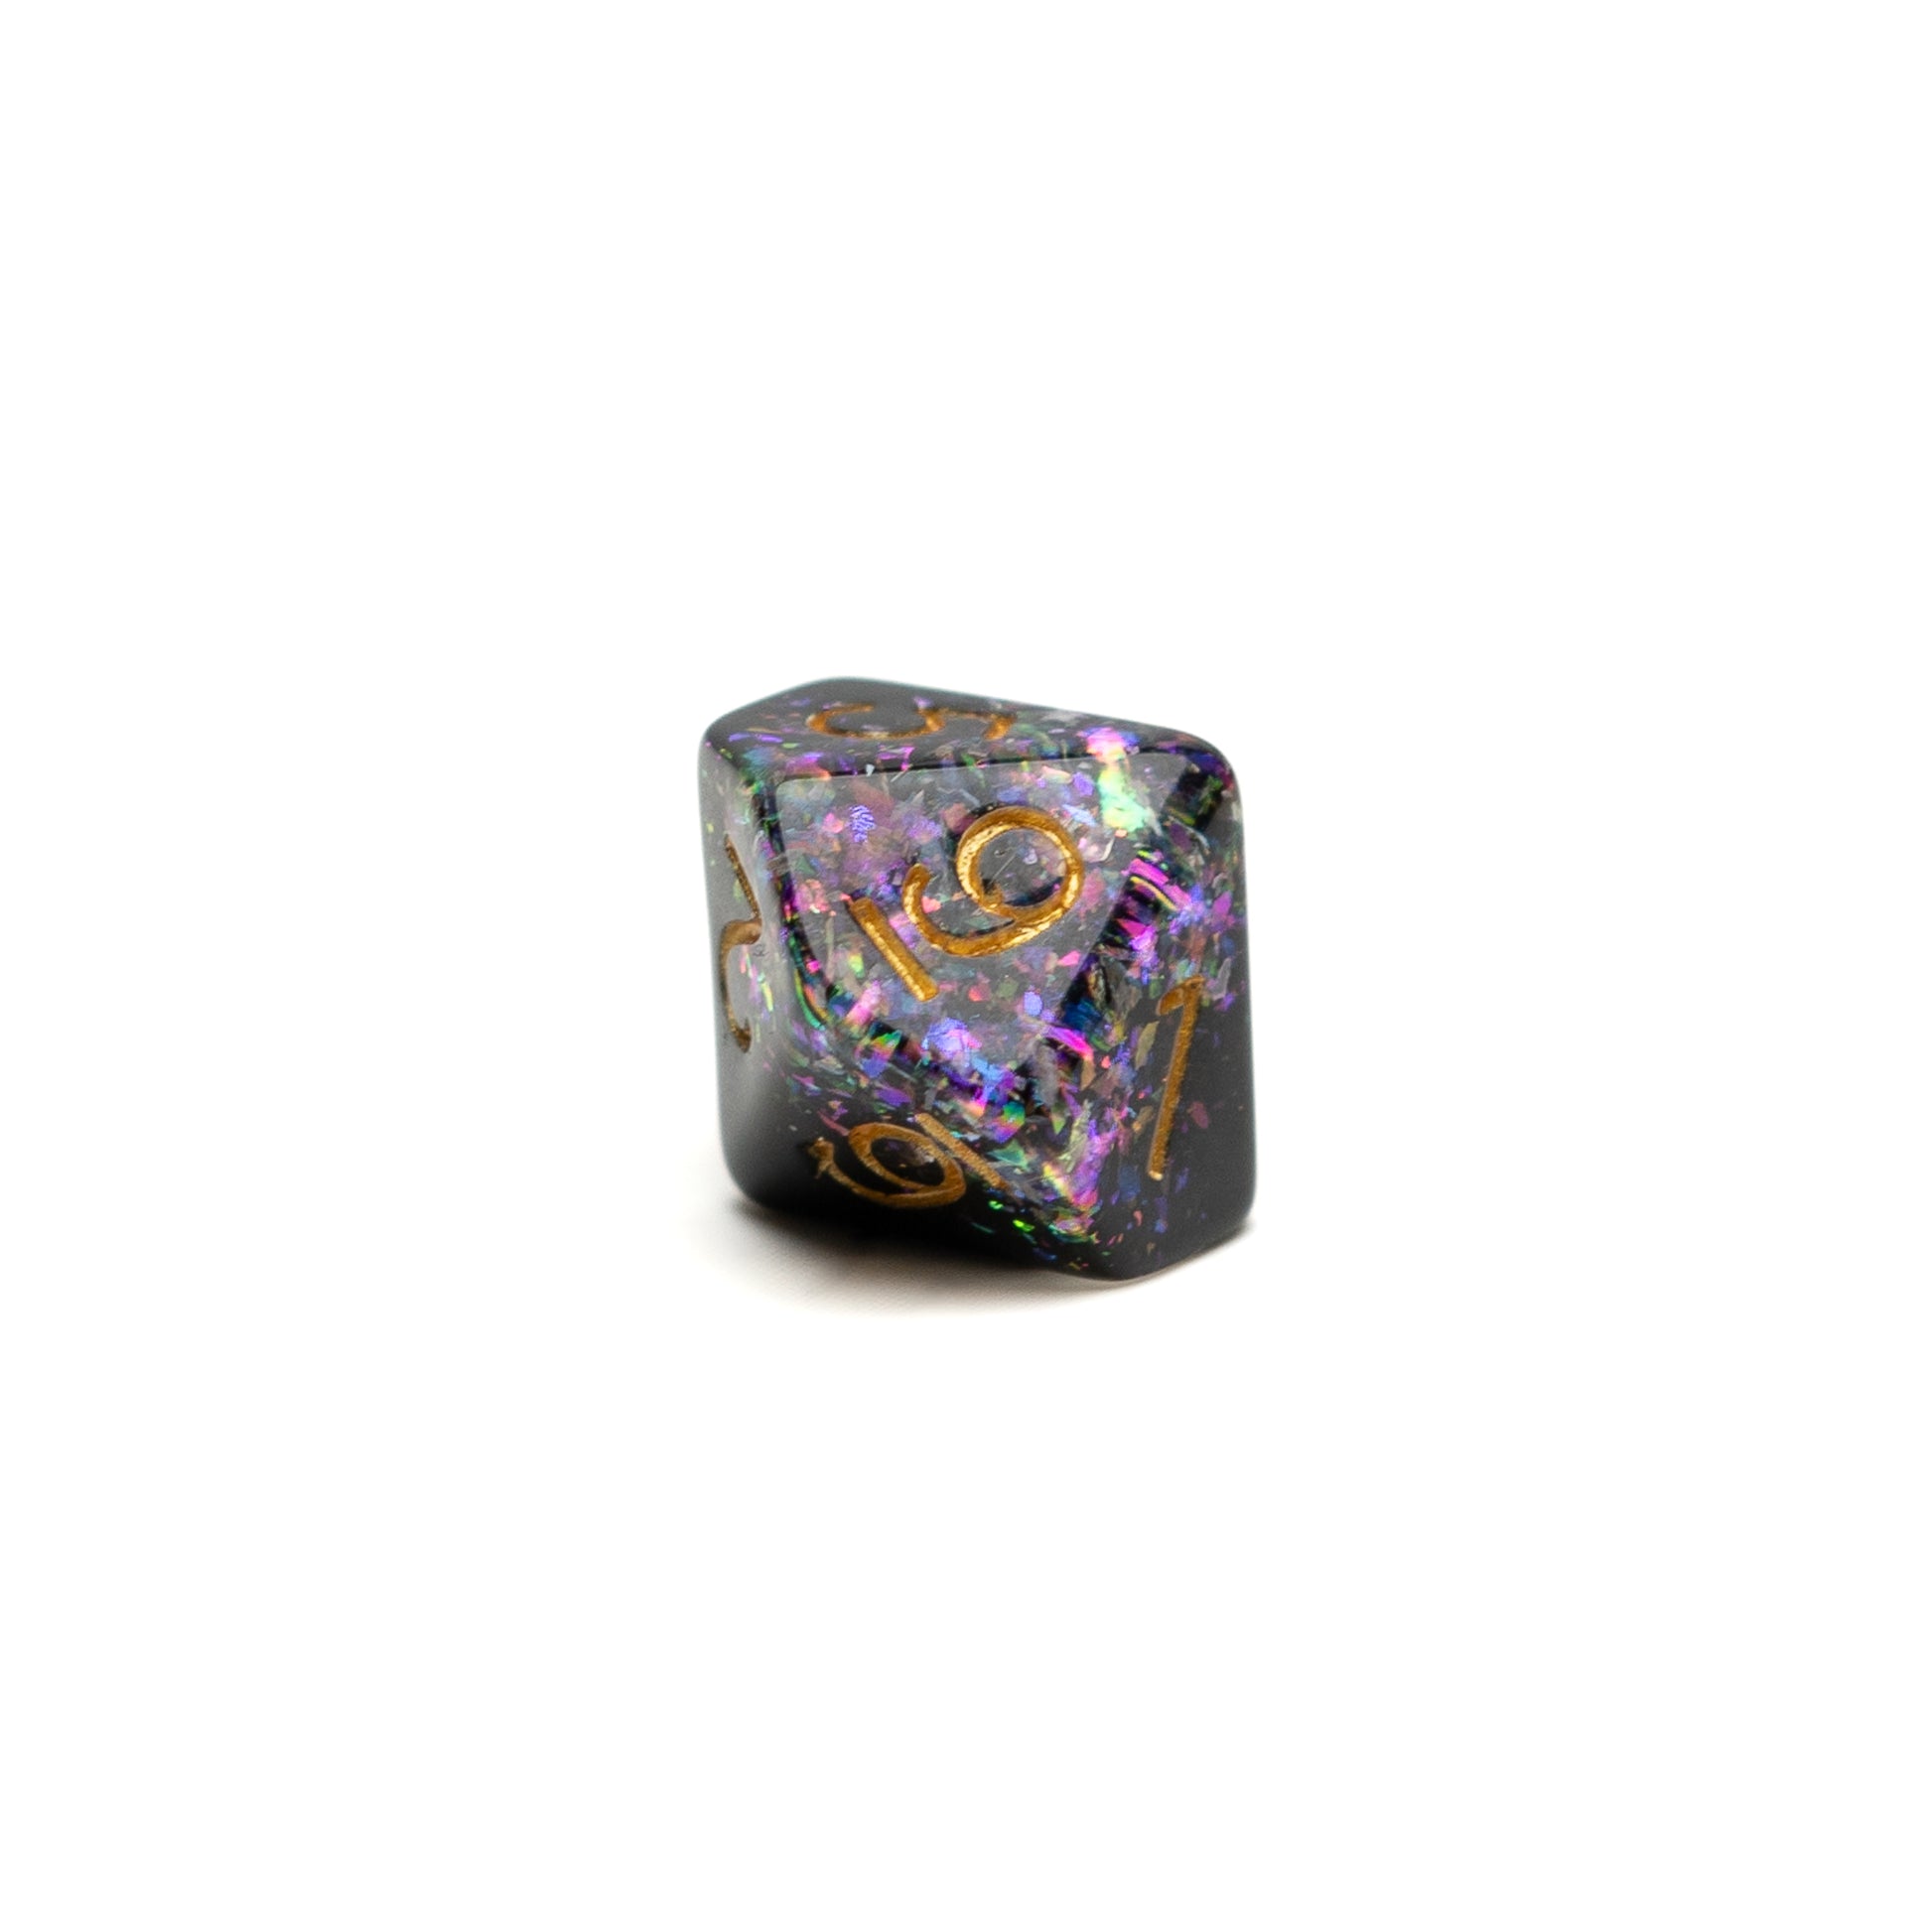 Roll Britannia Derek Normalbeard Dungeons and Dragons D10 Dice with Rainbow Glitter Confetti Aesthetic